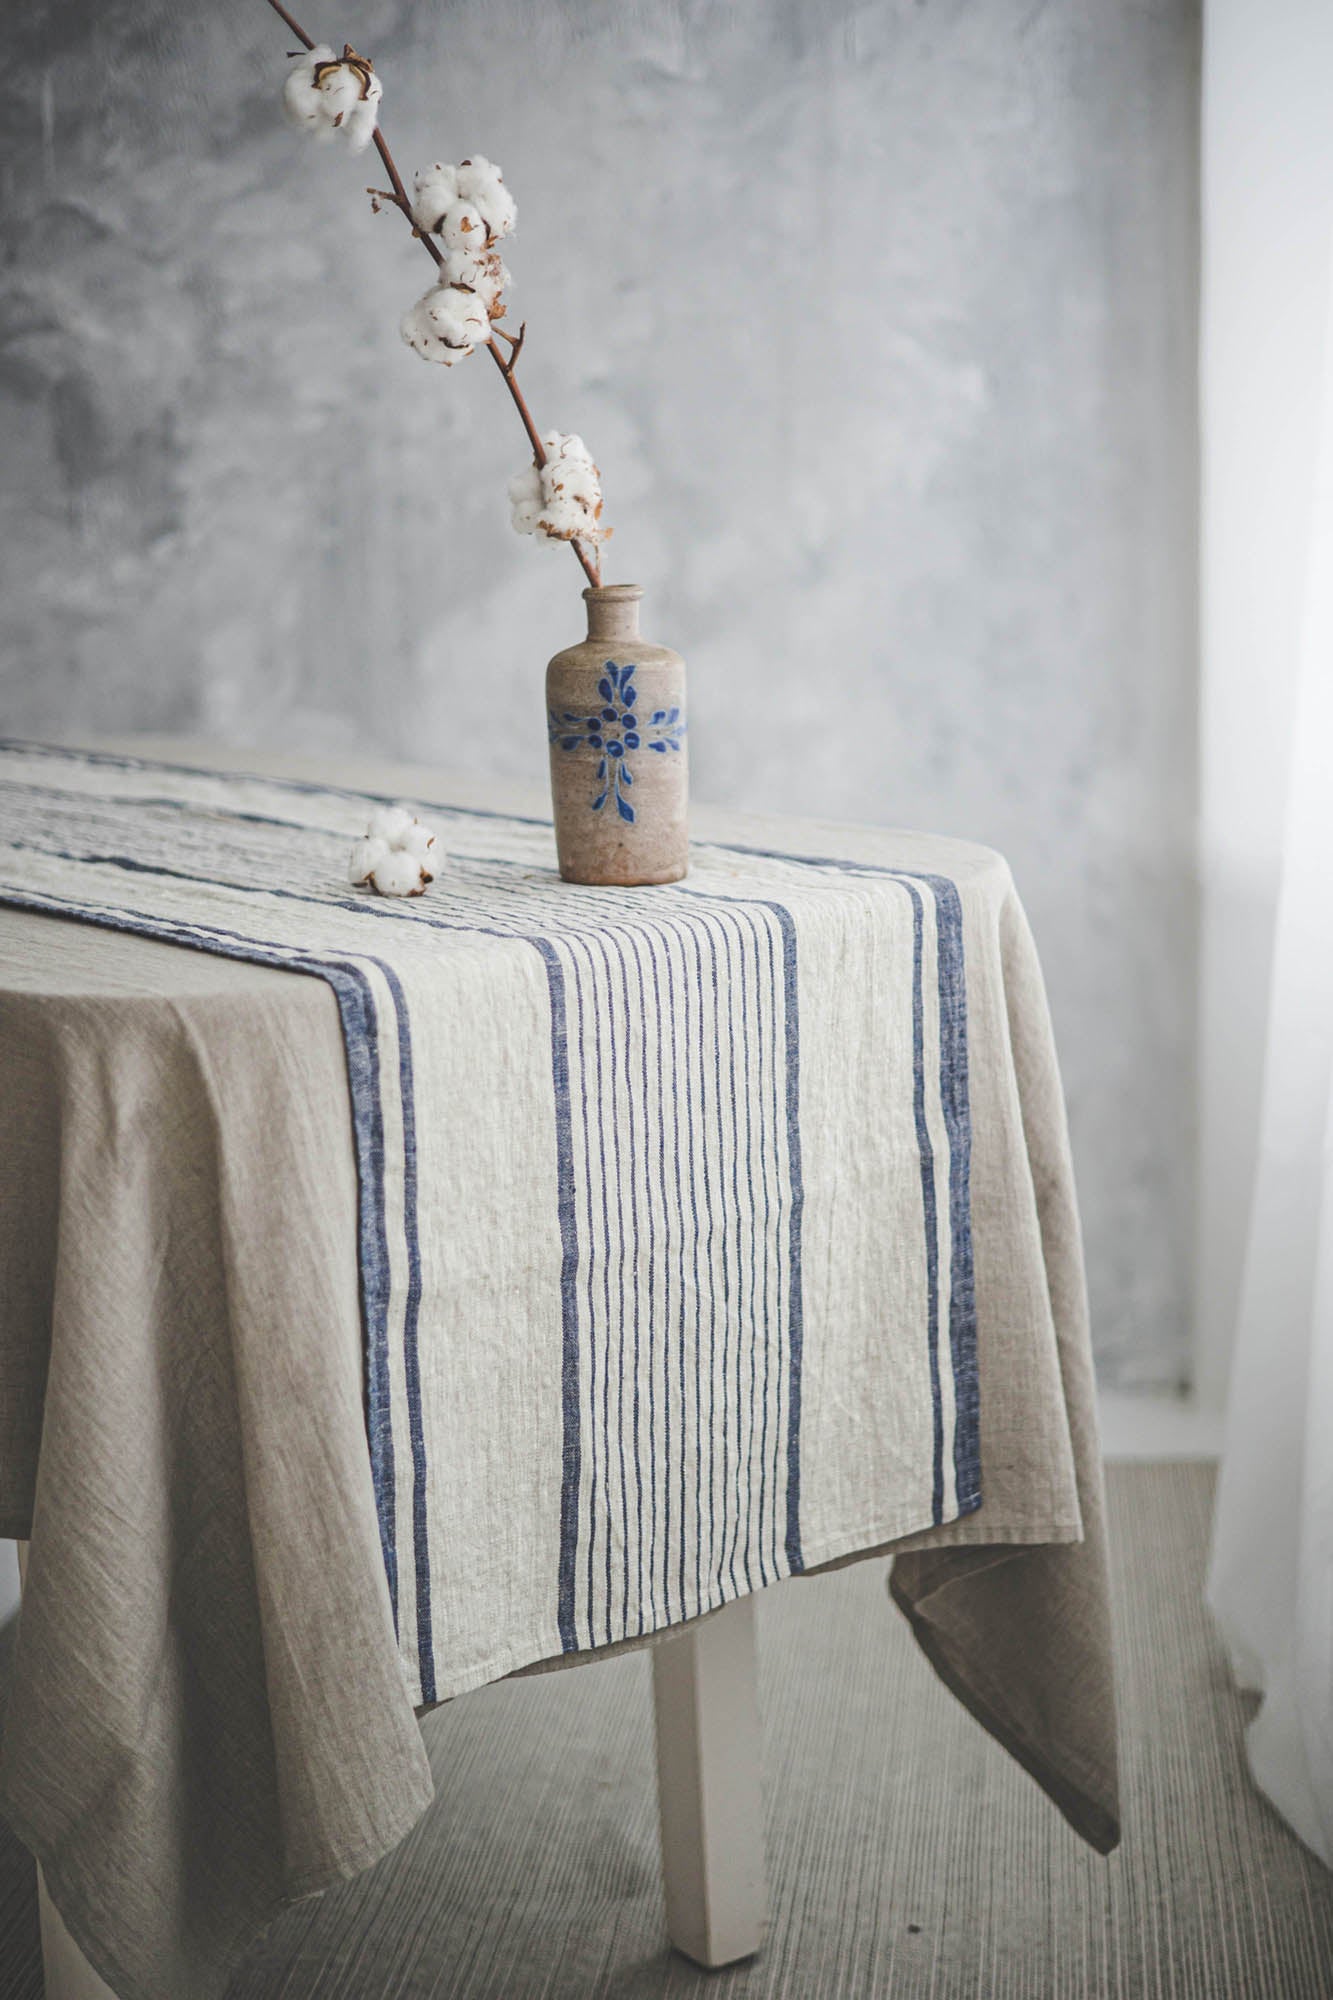 French style linen table runner with blue stripes